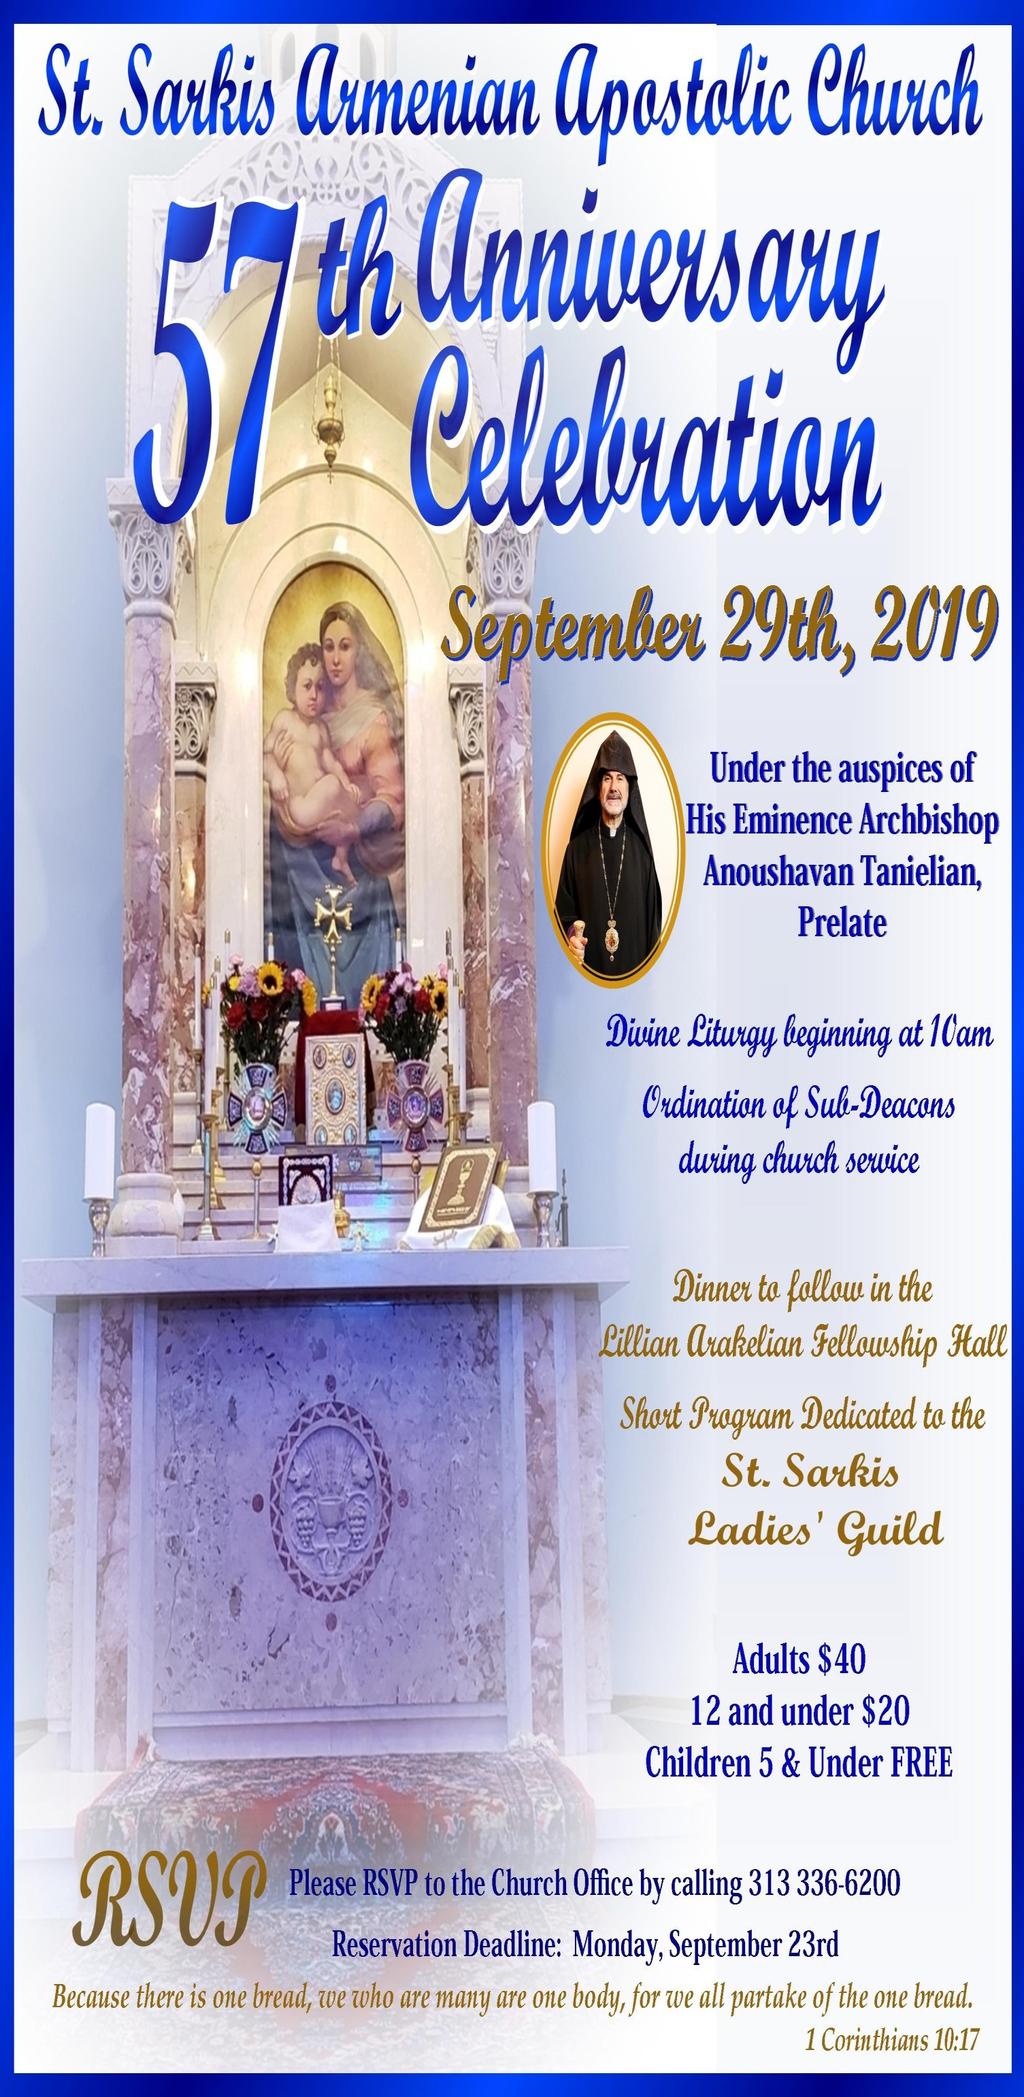 Exaltation of the Holy Cross This Sunday, September 15, the Armenian Church commemorates the Feast of the Exaltation of the Holy Cross (Khachverats), which is the last of the five Tabernacle Feasts